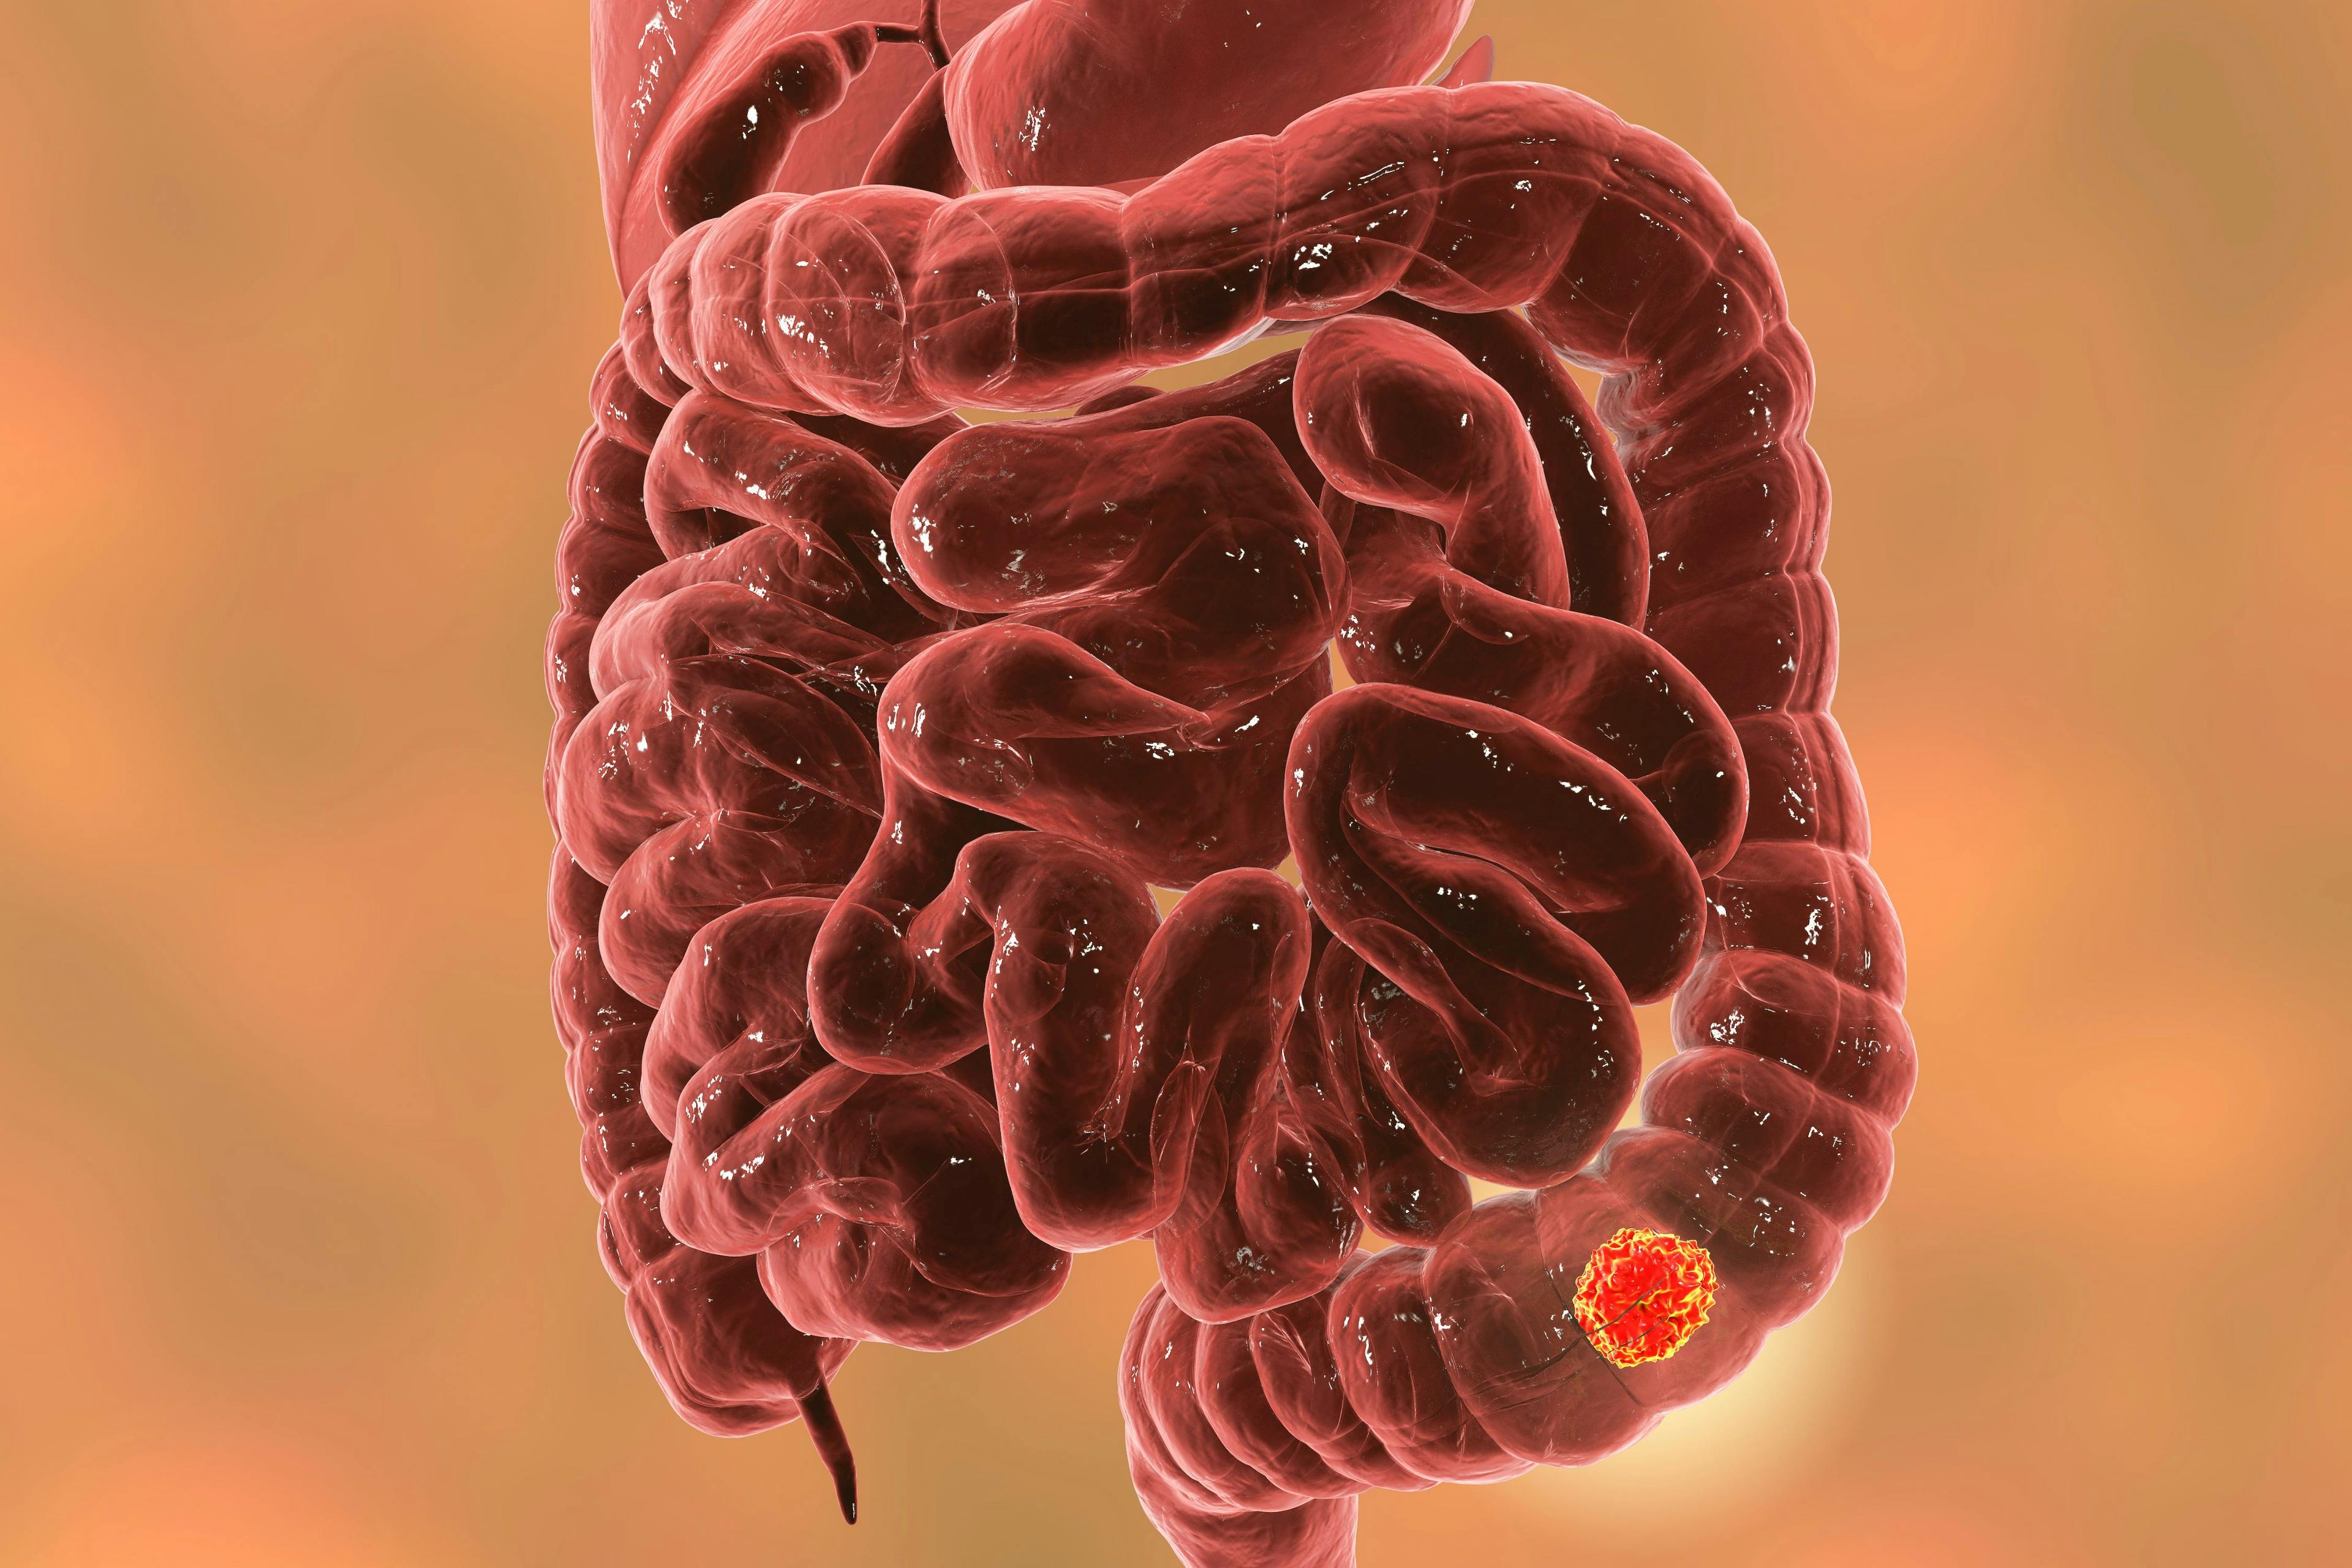 Colorectal cancer | Image credit: Dr_Microbe - stock.adobe.com